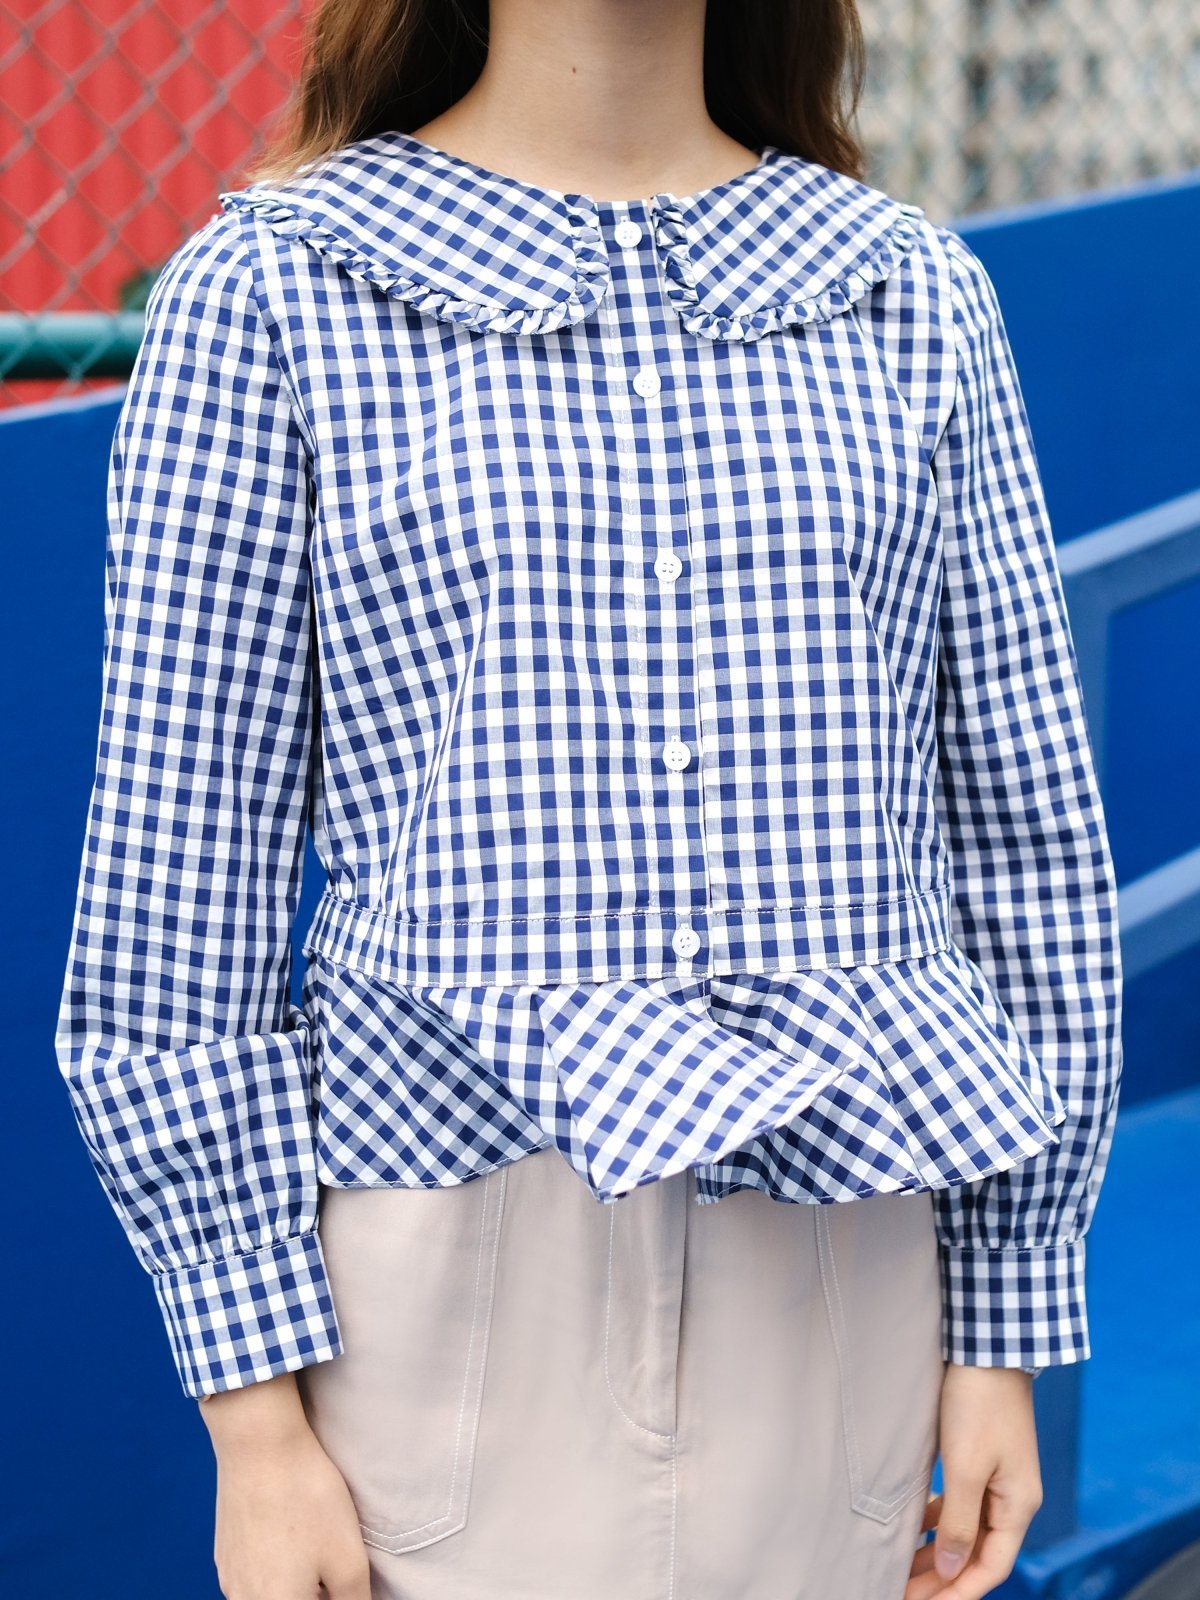 Ruffled Checked Blouse CLASSIC NAVY - DAG-DD8797-21ClassicNavyS - Blue White Checkers - S - D'zage Designs